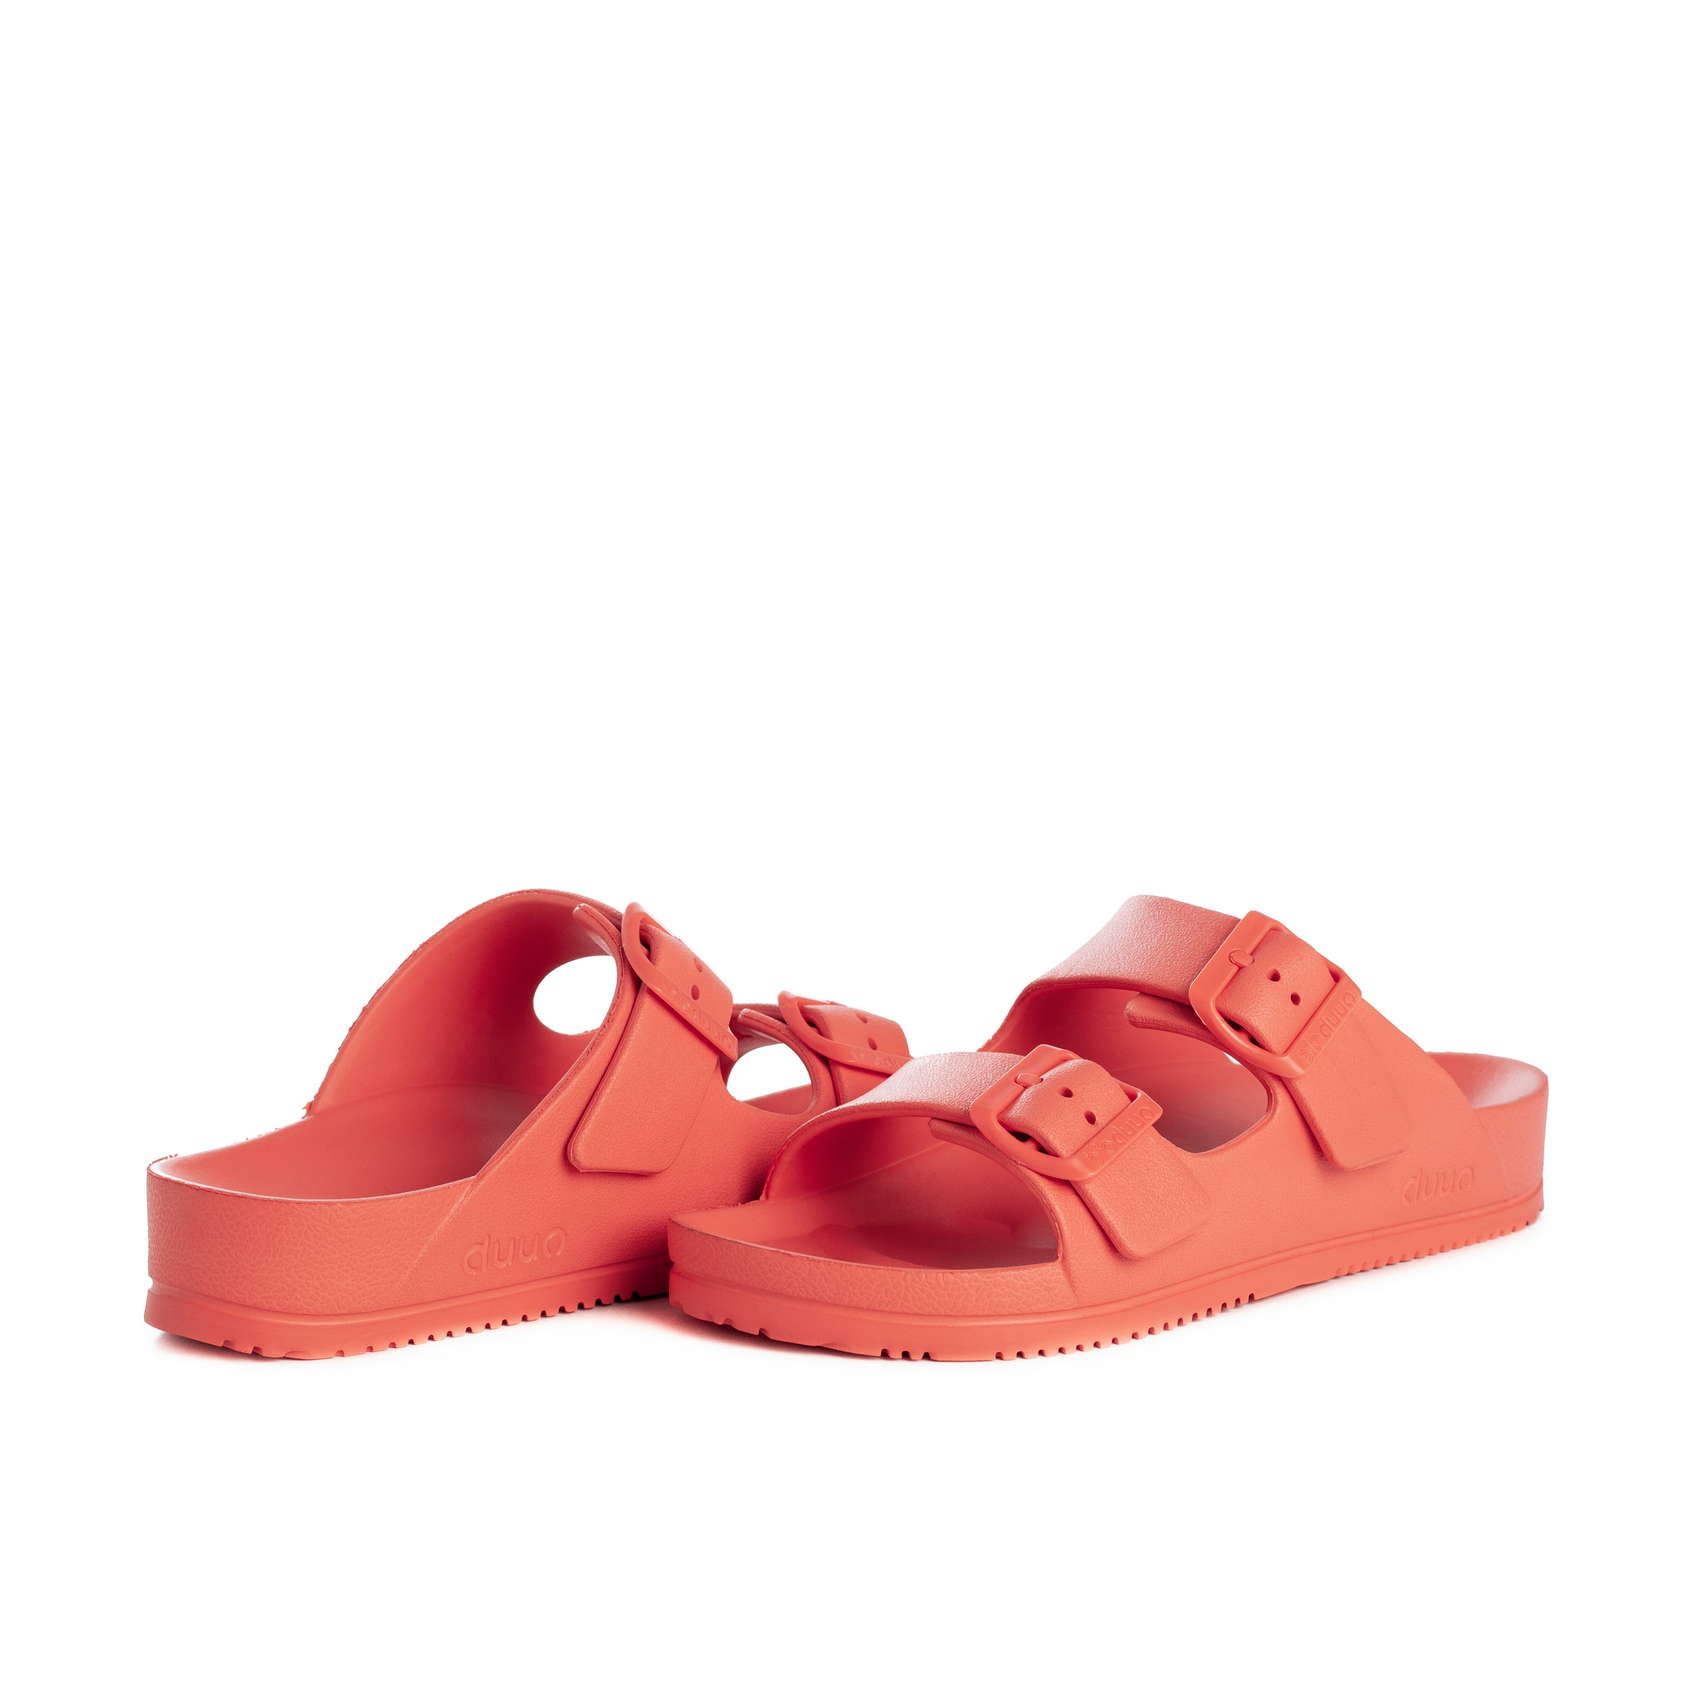 Flat sandal block color in corall